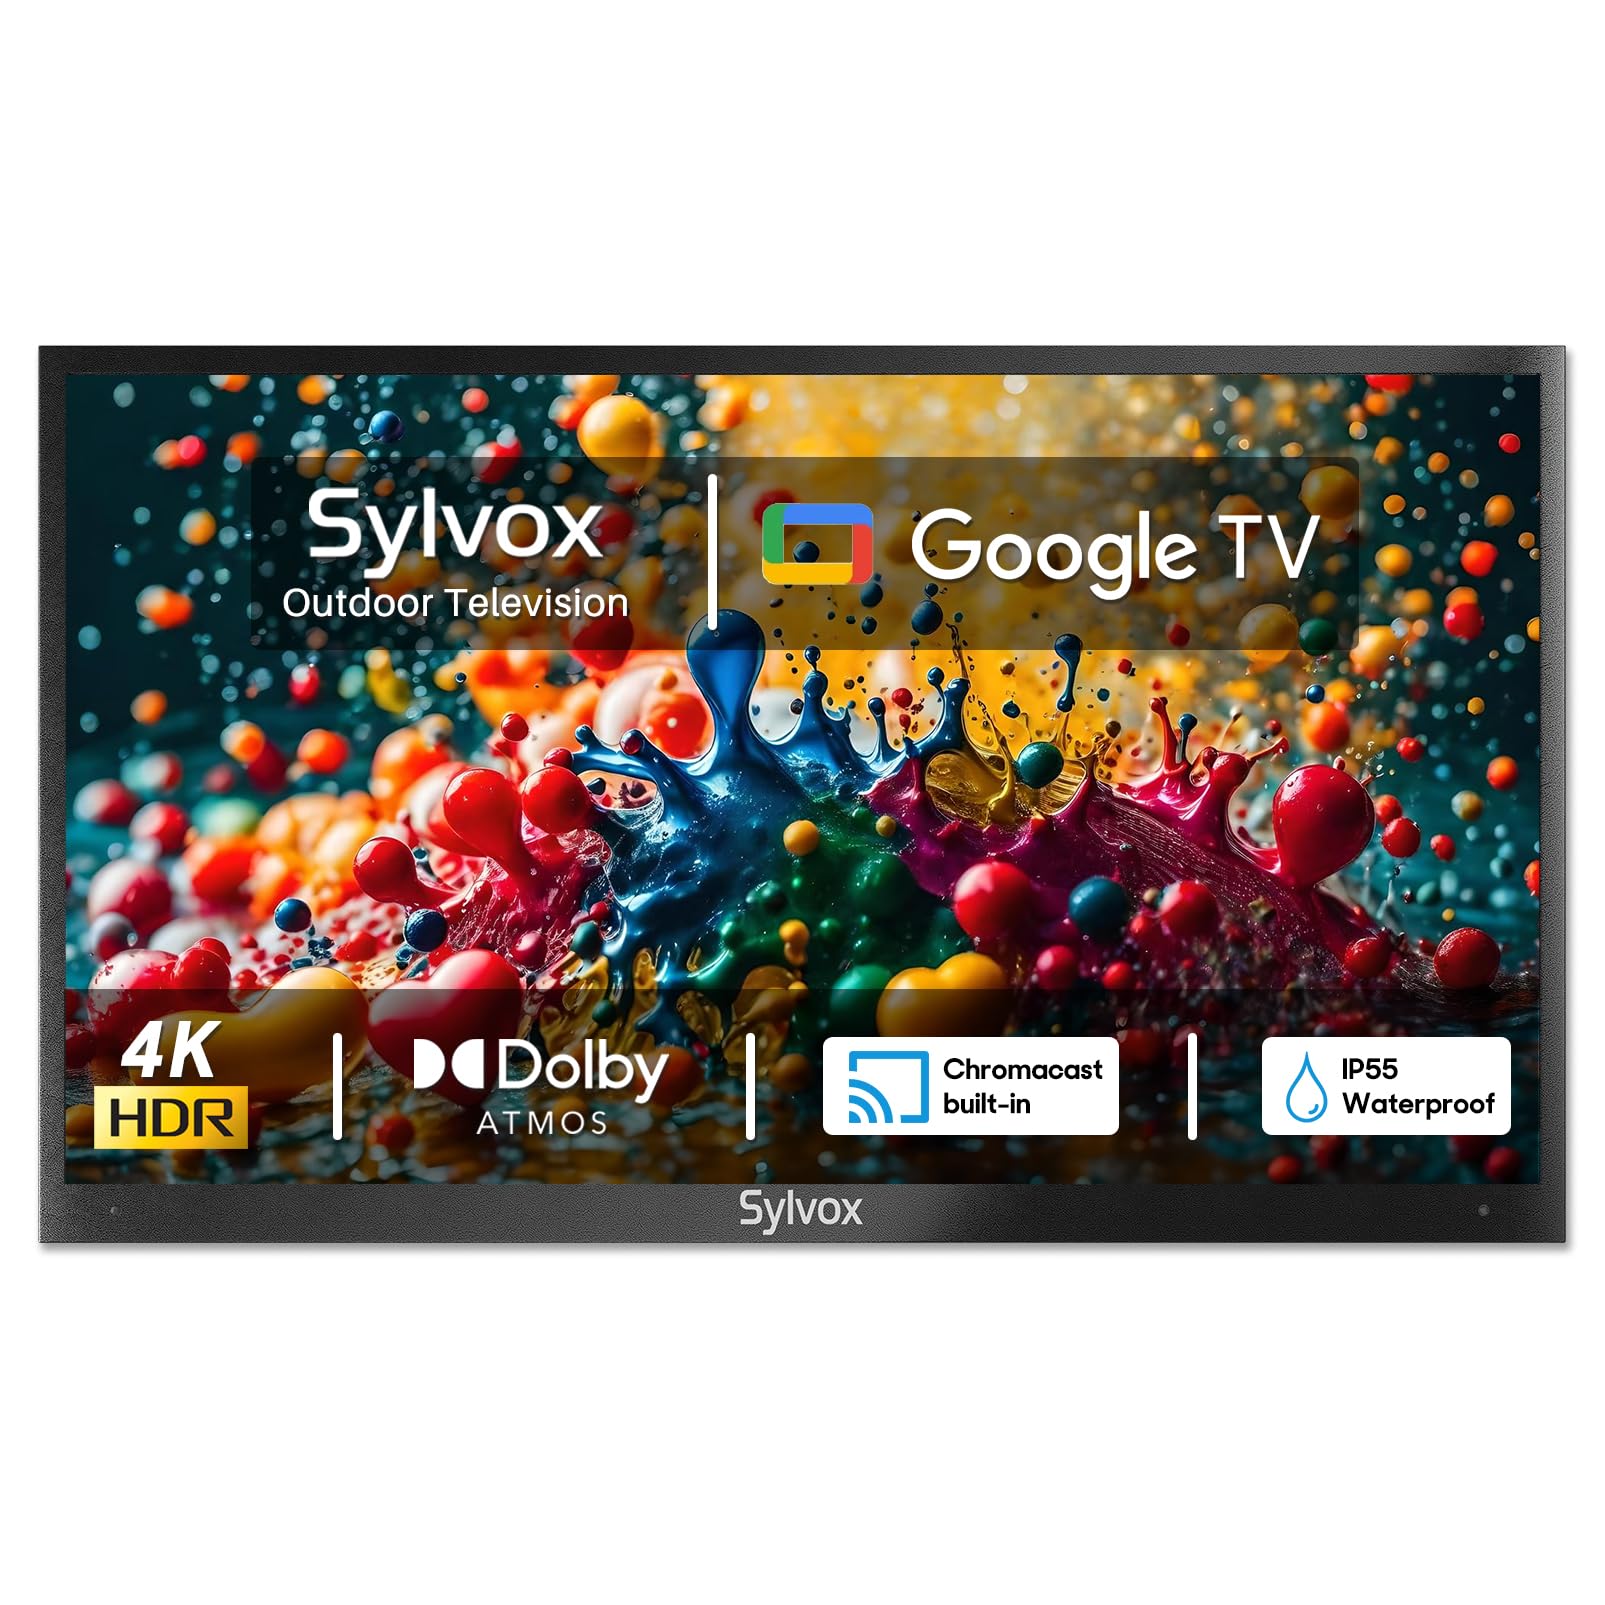 SYLVOX Smart Outdoor TV, 65 inch Outdoor Television Upgraded Google TV, 4K Weatherproof Outside TV, IP55 Waterproof, Google Assistant, Chromecast, 1000 nit Brightness for Partial Sun (Deck Pro 2.0)